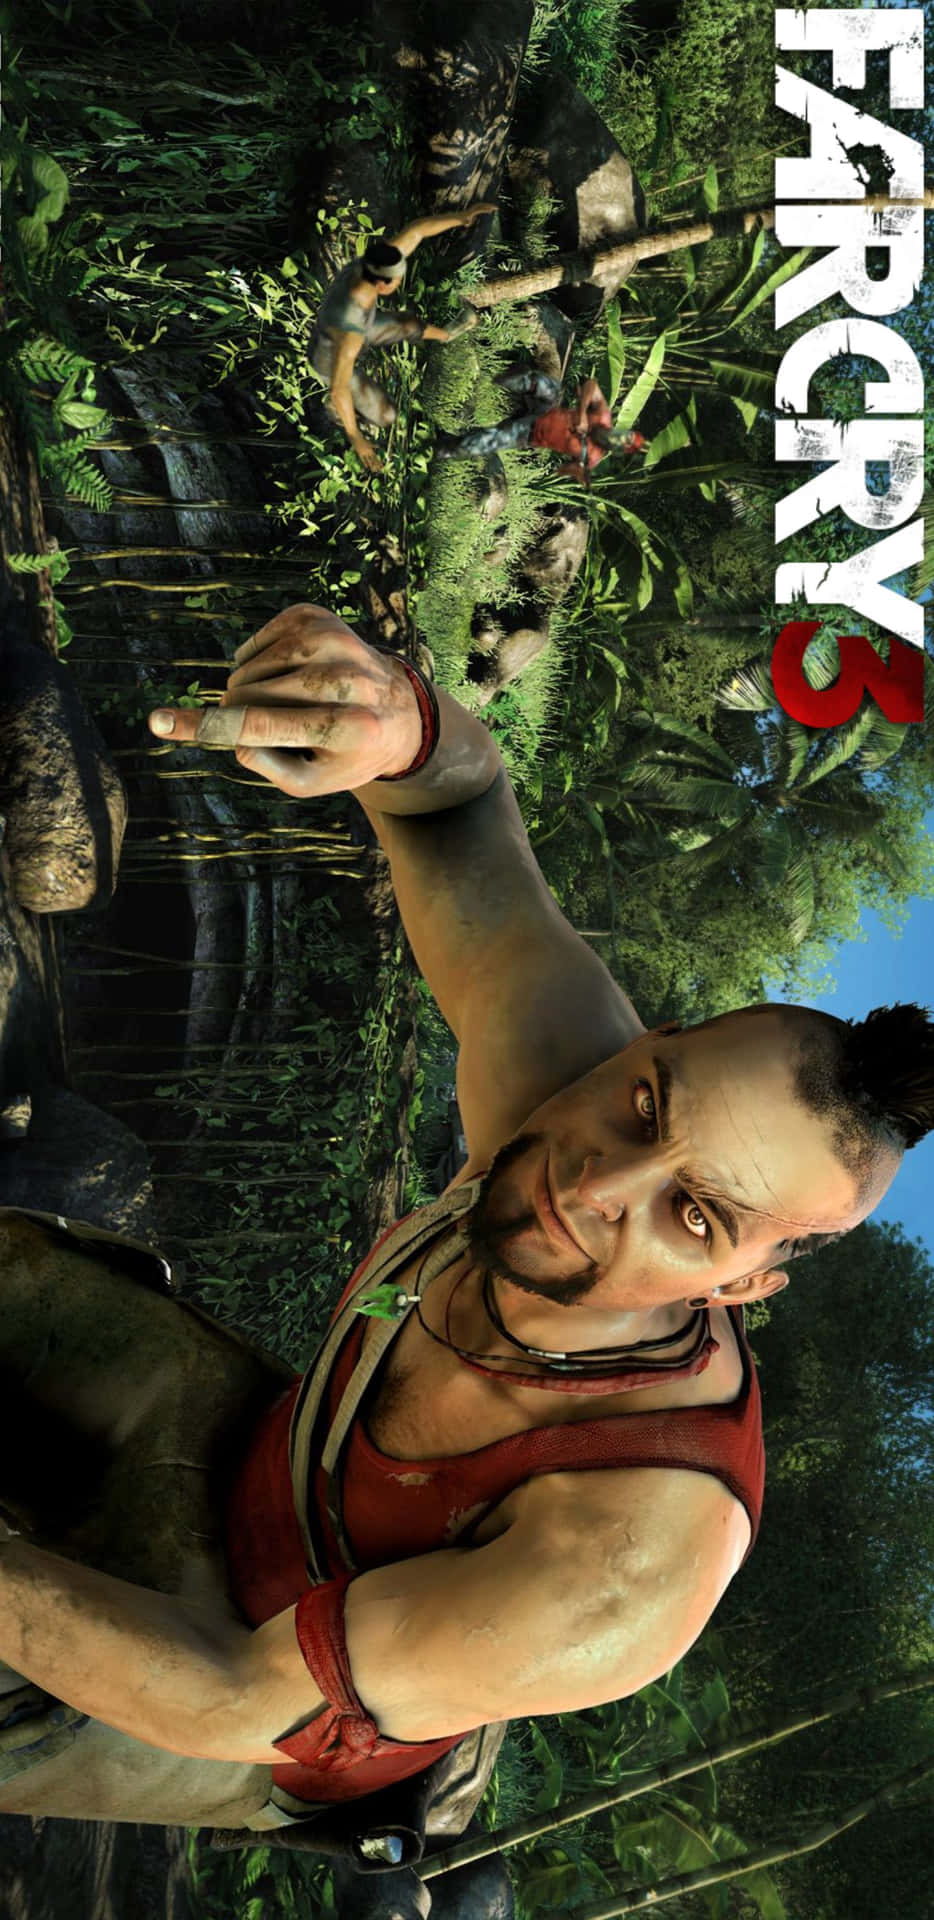 Power Up with Pixel 3xl and Enter Far Cry 3